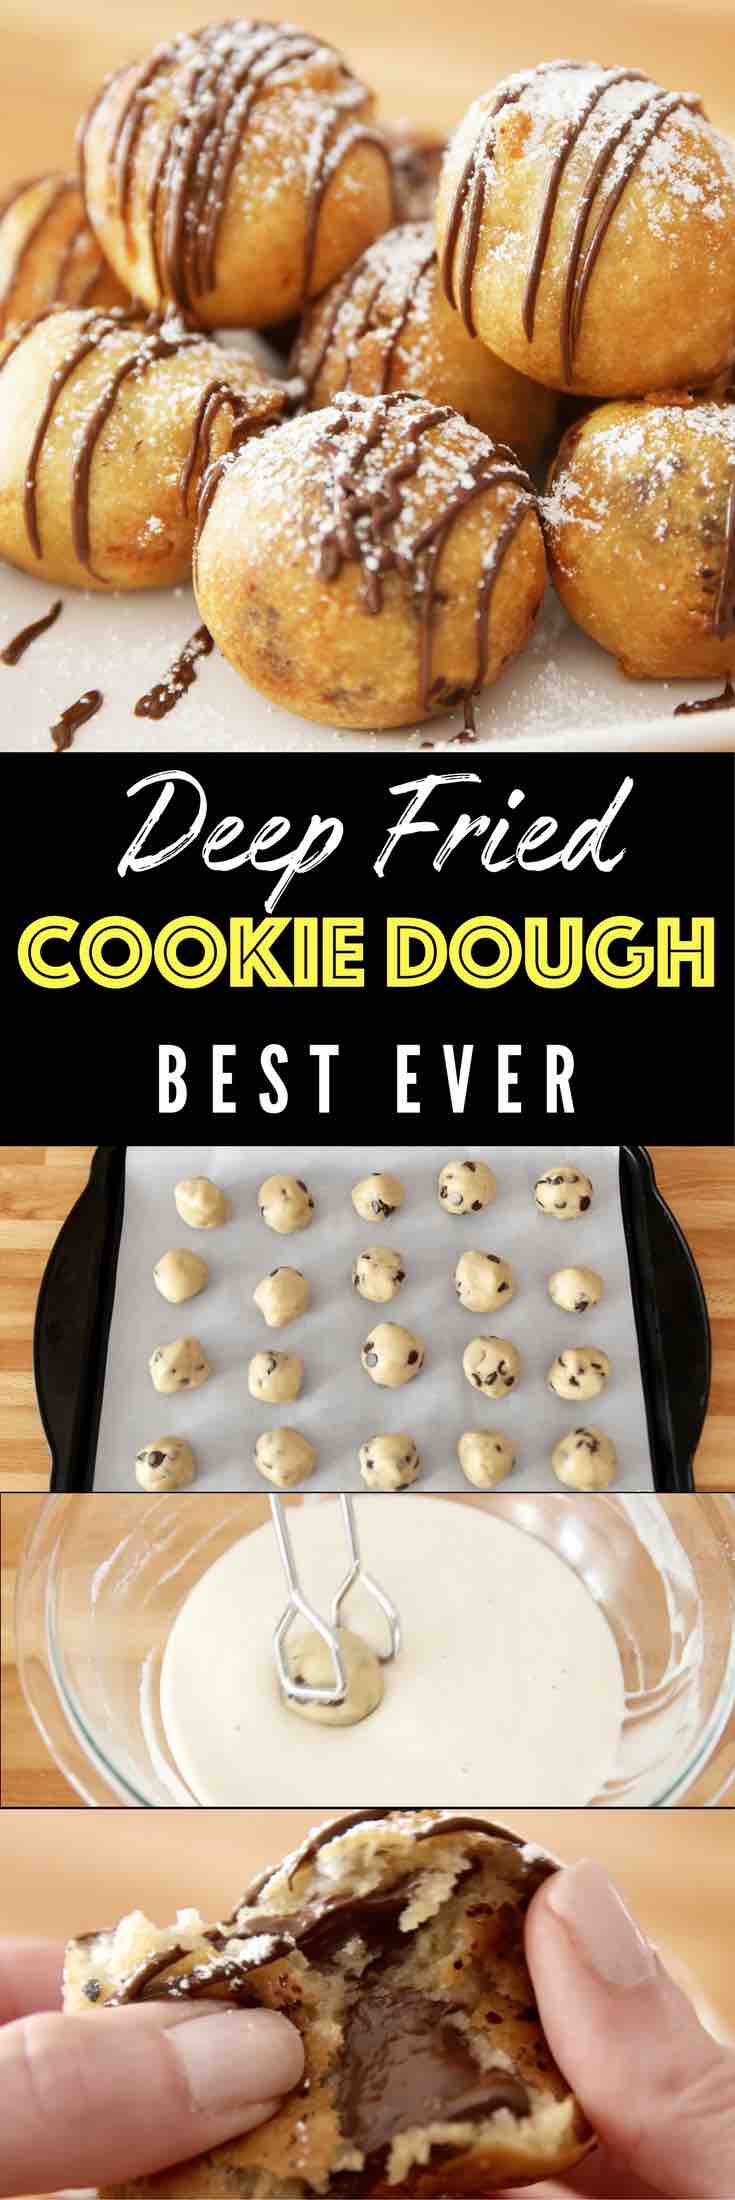 Deep Fried Cookie Dough – OMG seriously the best dessert ever! Enjoyed the deep-fried cookie dough awesomeness of the state fair all year round. Chocolate chip cookie dough dipped in homemade batter, and fried to a fluffy, golden crispy ball with a warm and melty chocolate chips inside. Quick and easy recipe. Perfect for party desserts. No bake, vegetarian. Video recipe. | Tipbuzz.com